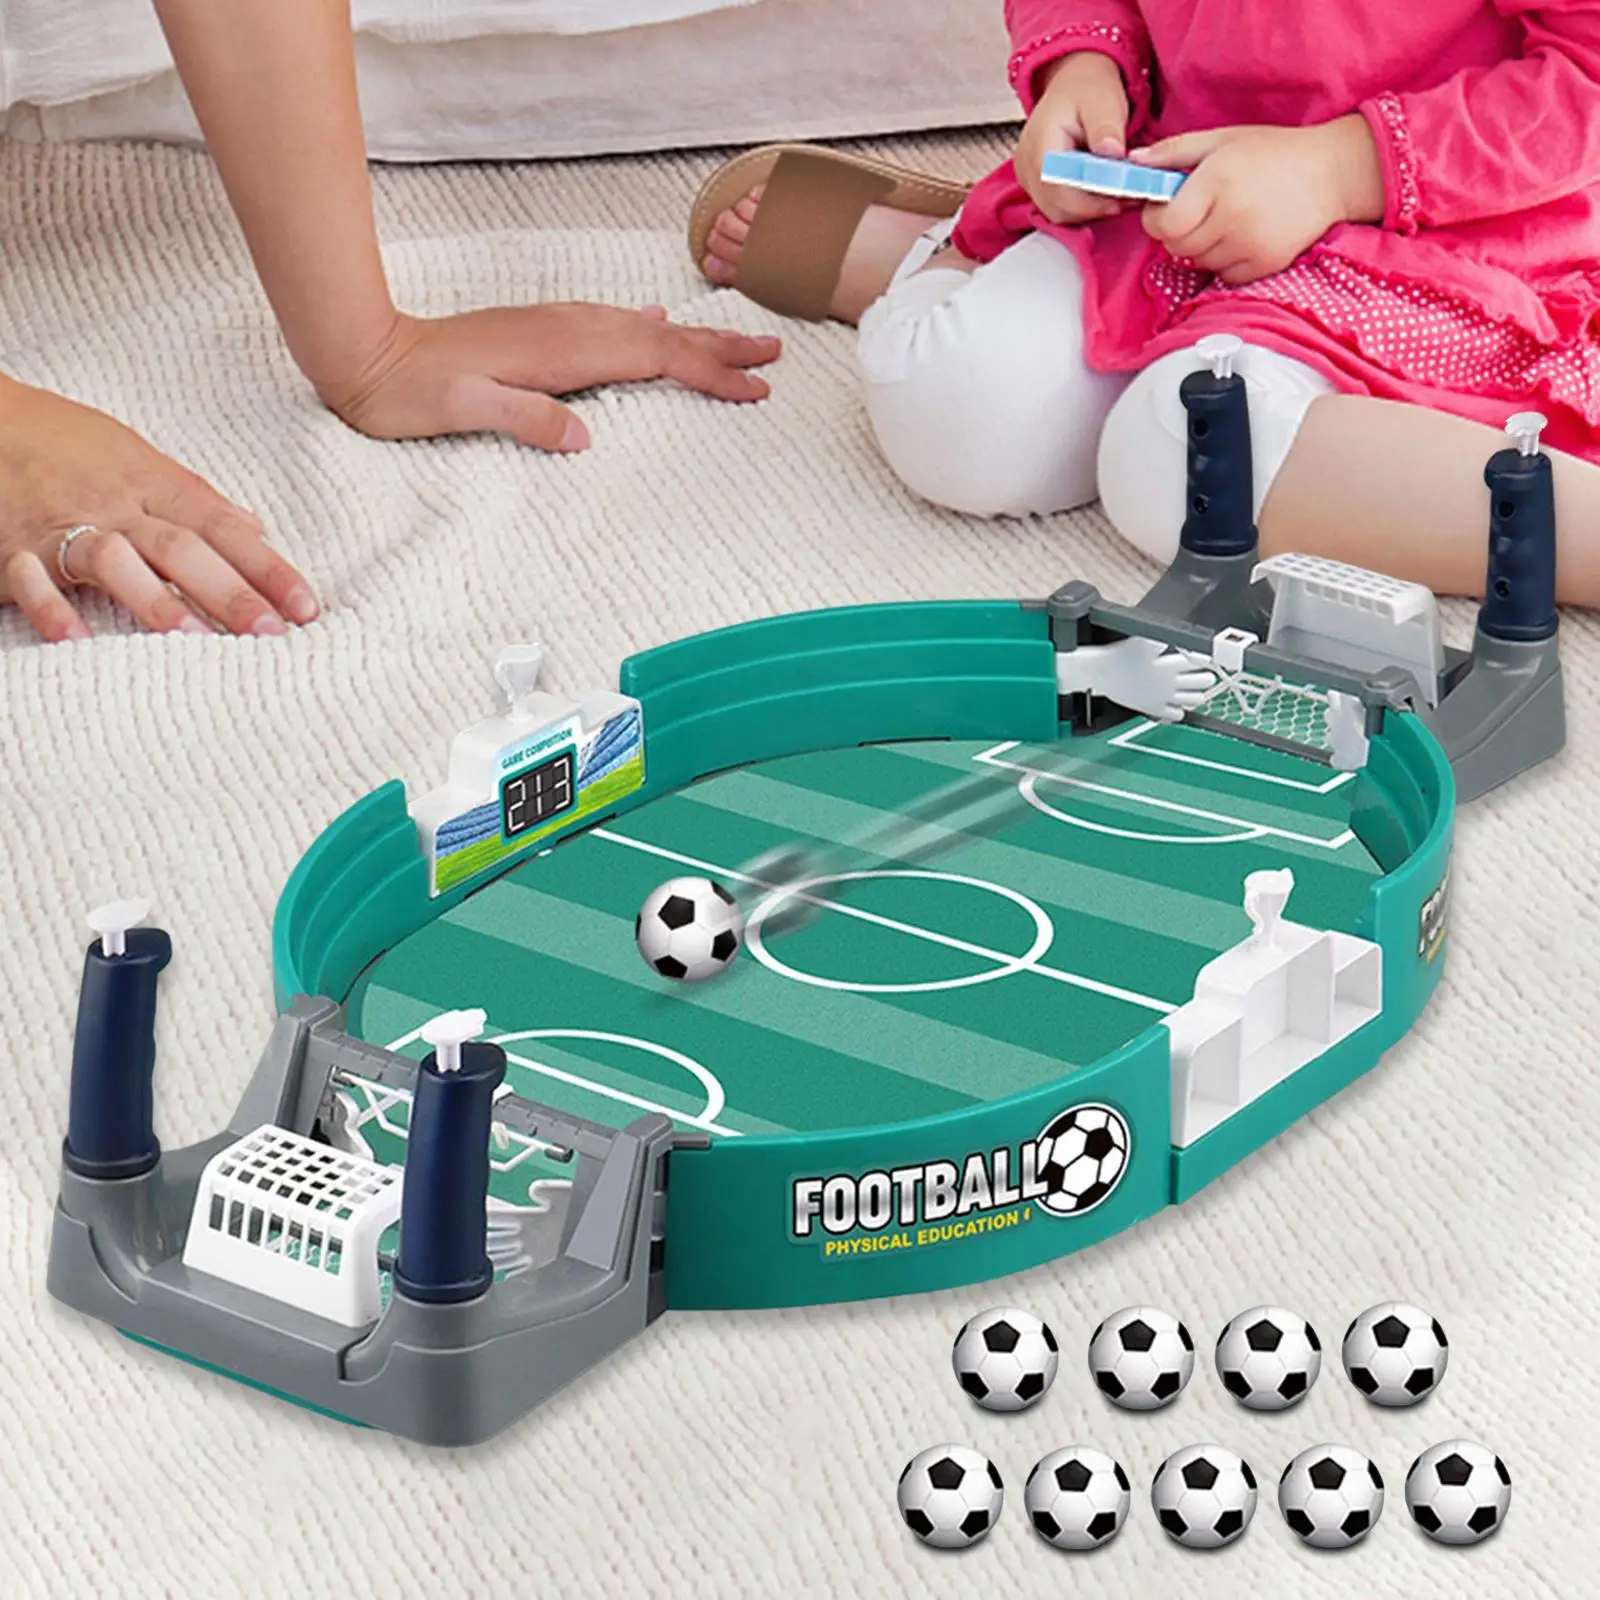 Table Soccer game Board Game Hand Eye Coordination Interactive for Family Game Entertainment Kids Adults Two players